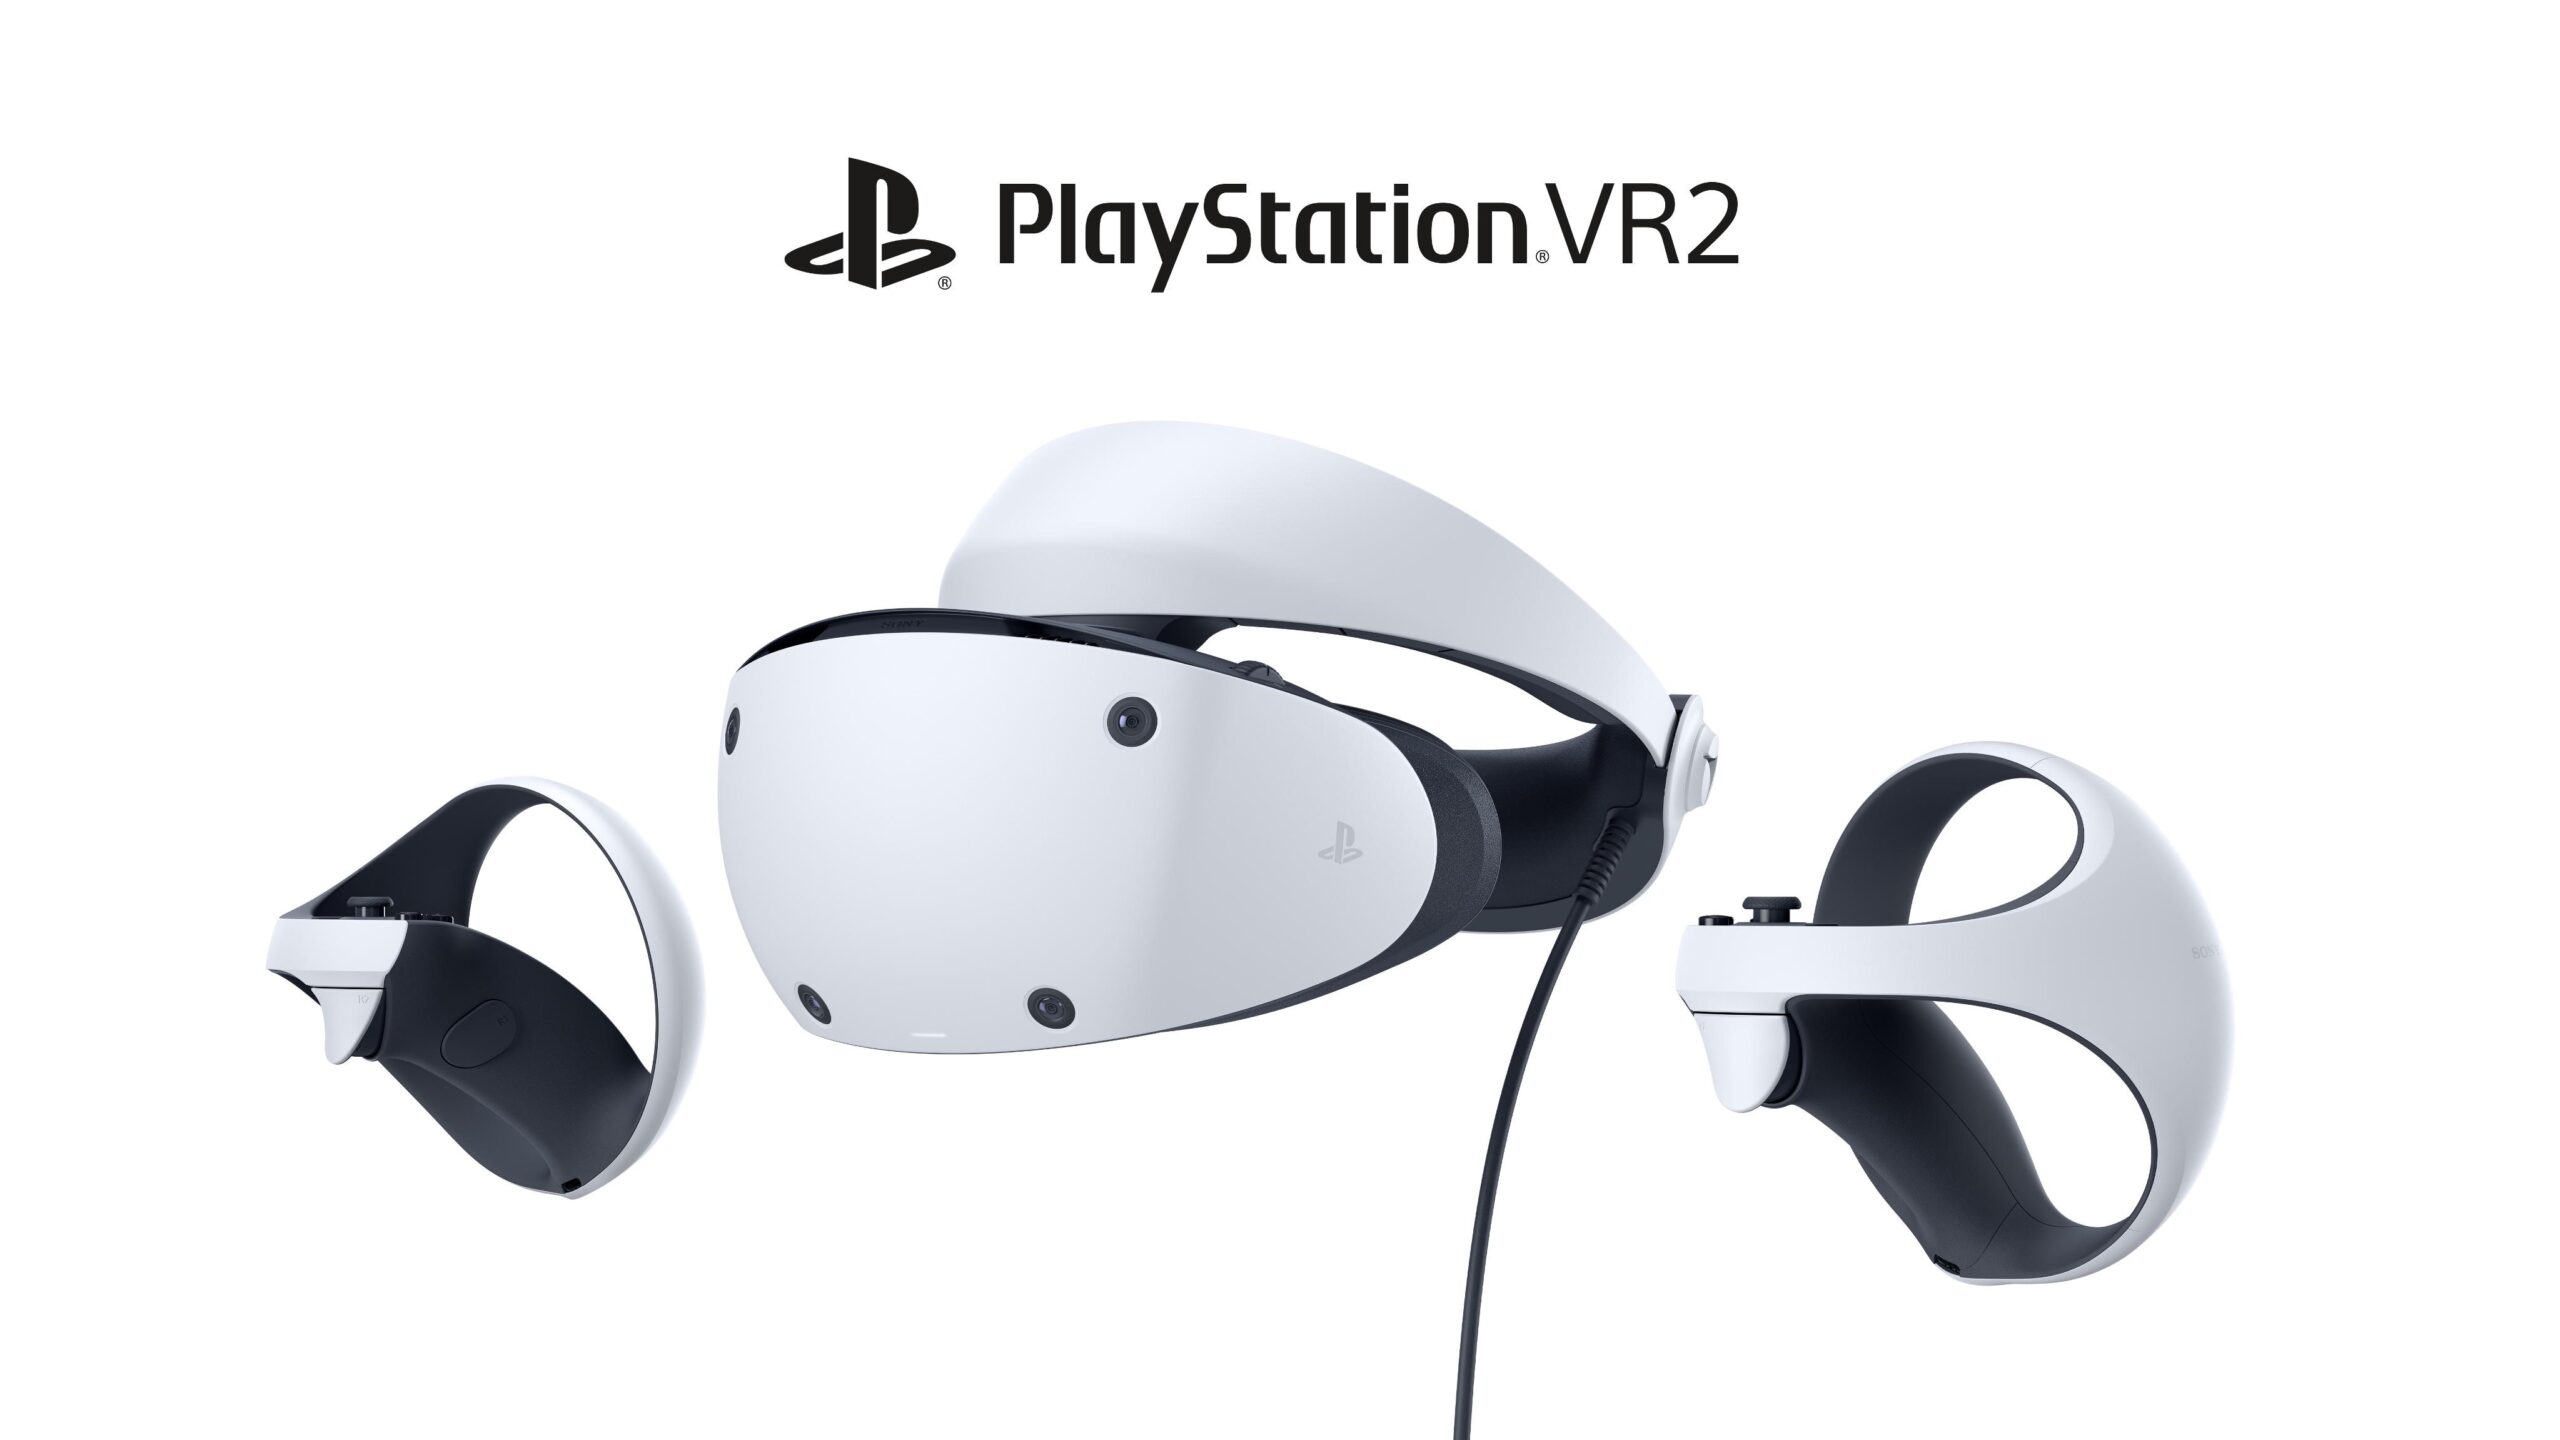 Import Records Reveal Sony Has Shipped Thousands of Dev Kits, Possibly PSVR 2